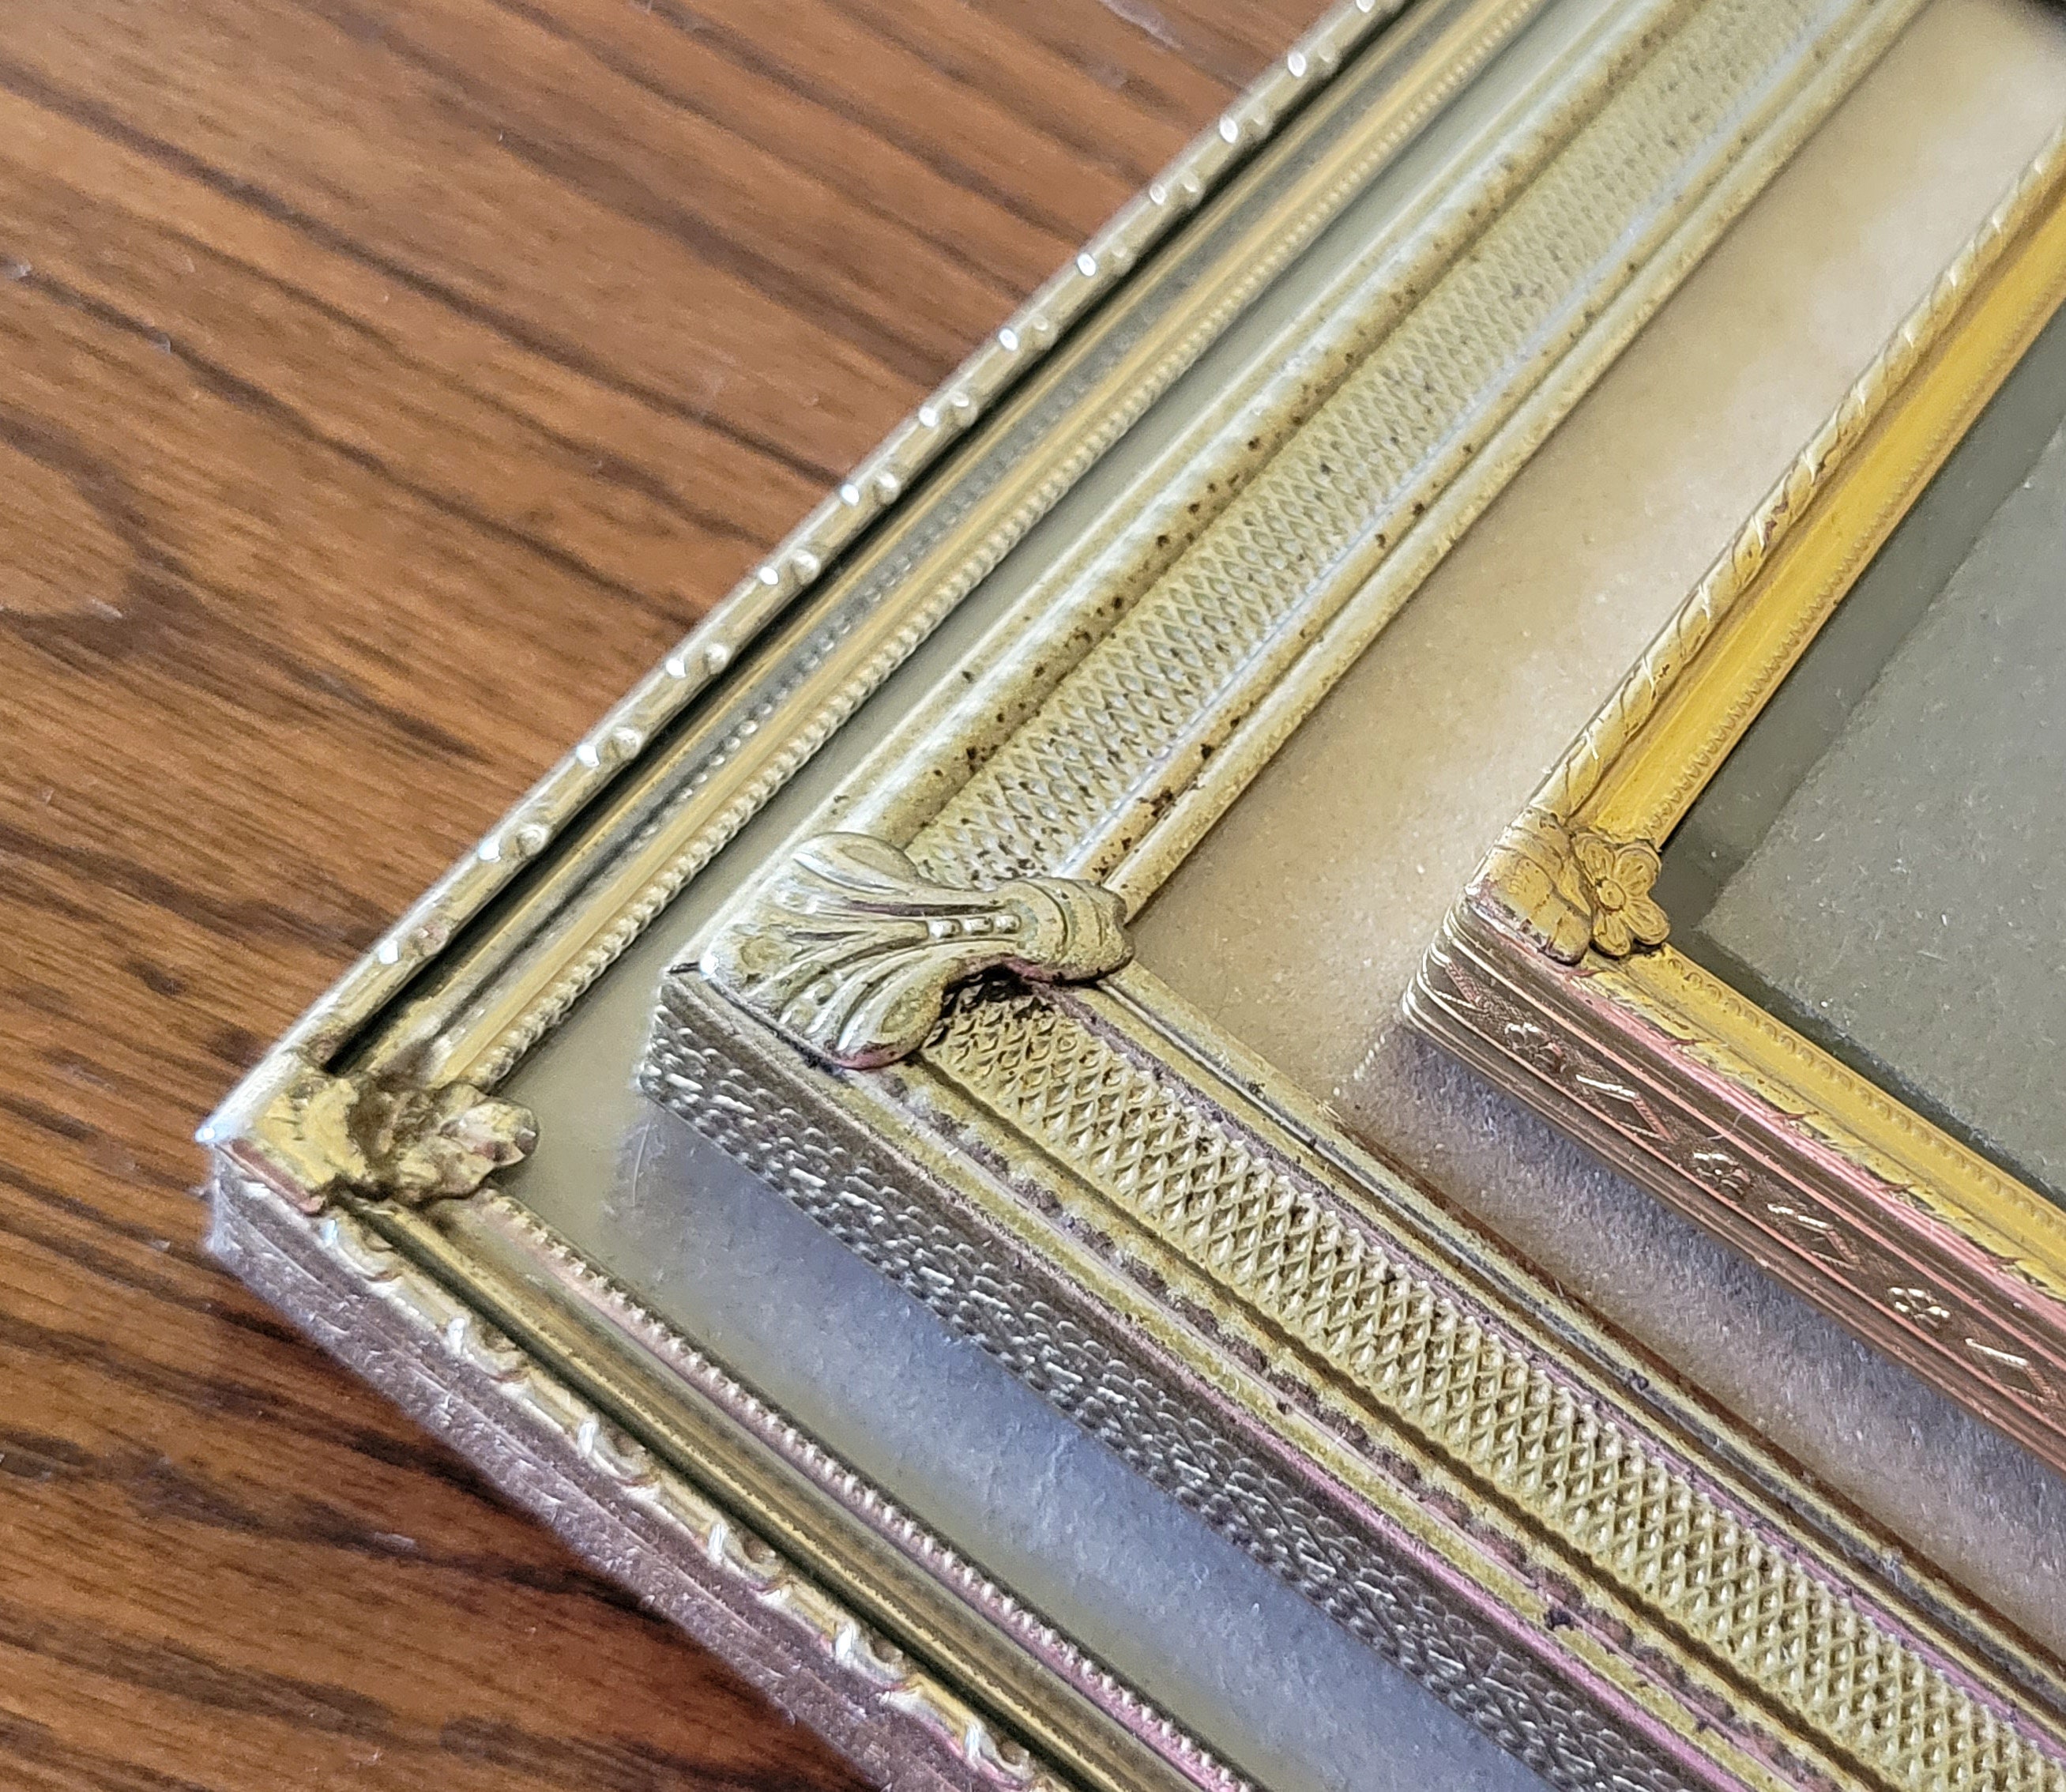 Three Vintage Swing Frames Table Shelf Frame Picture Framing Supplies Aged  Silver Antique Frame 